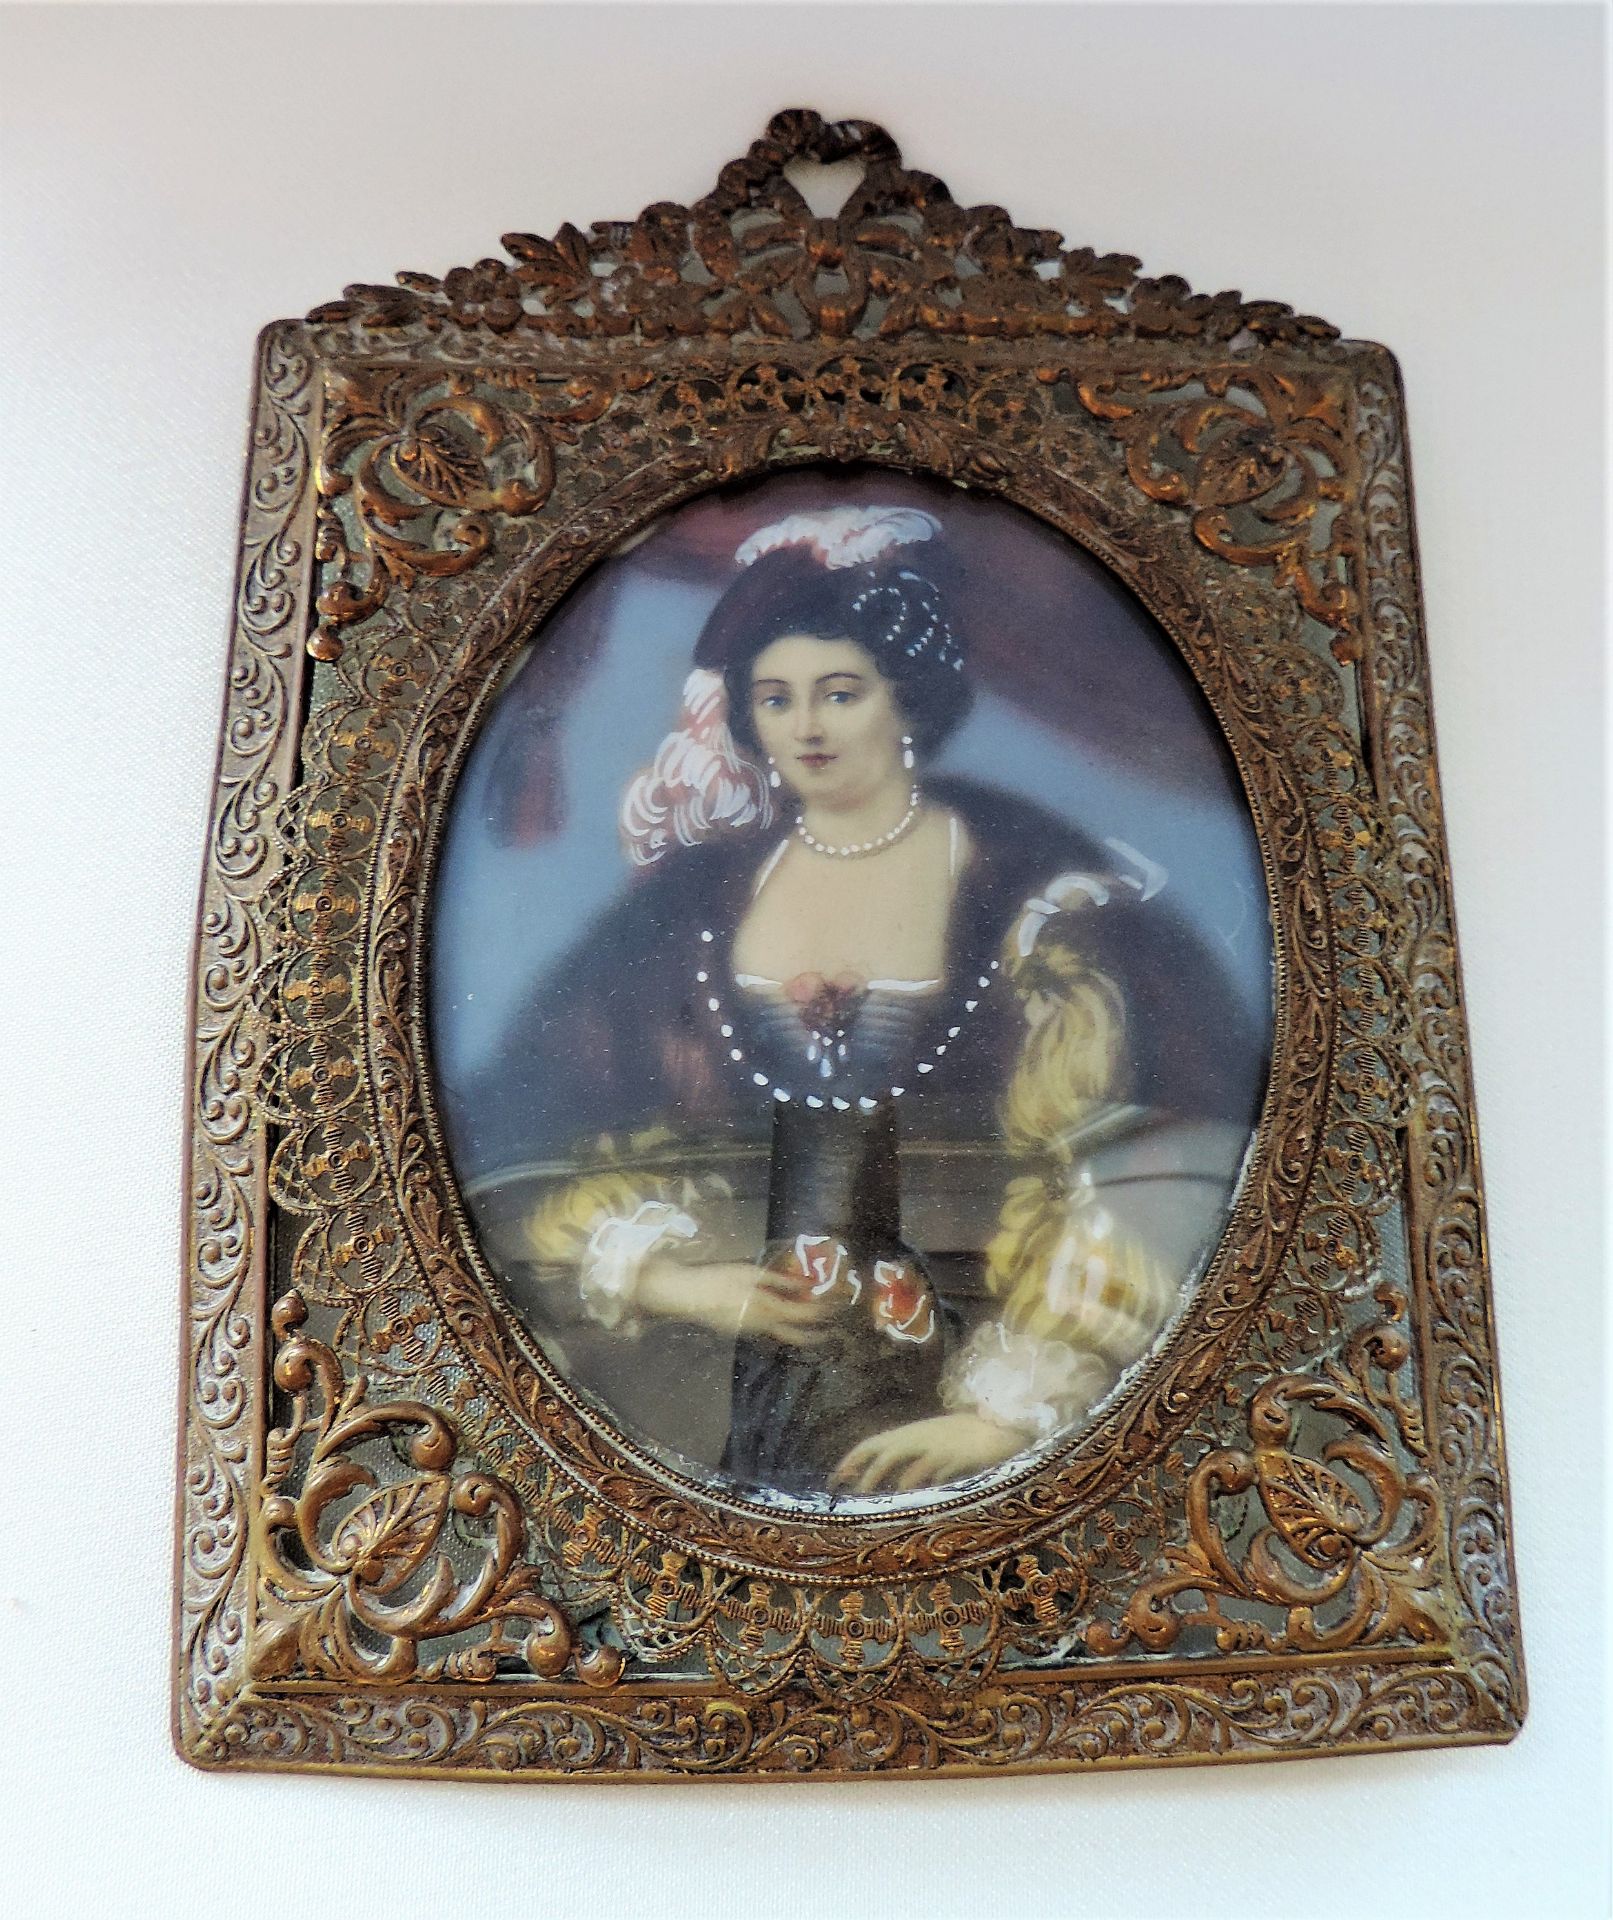 Antique Miniature Portrait Mary Queen of Scots - Image 3 of 6